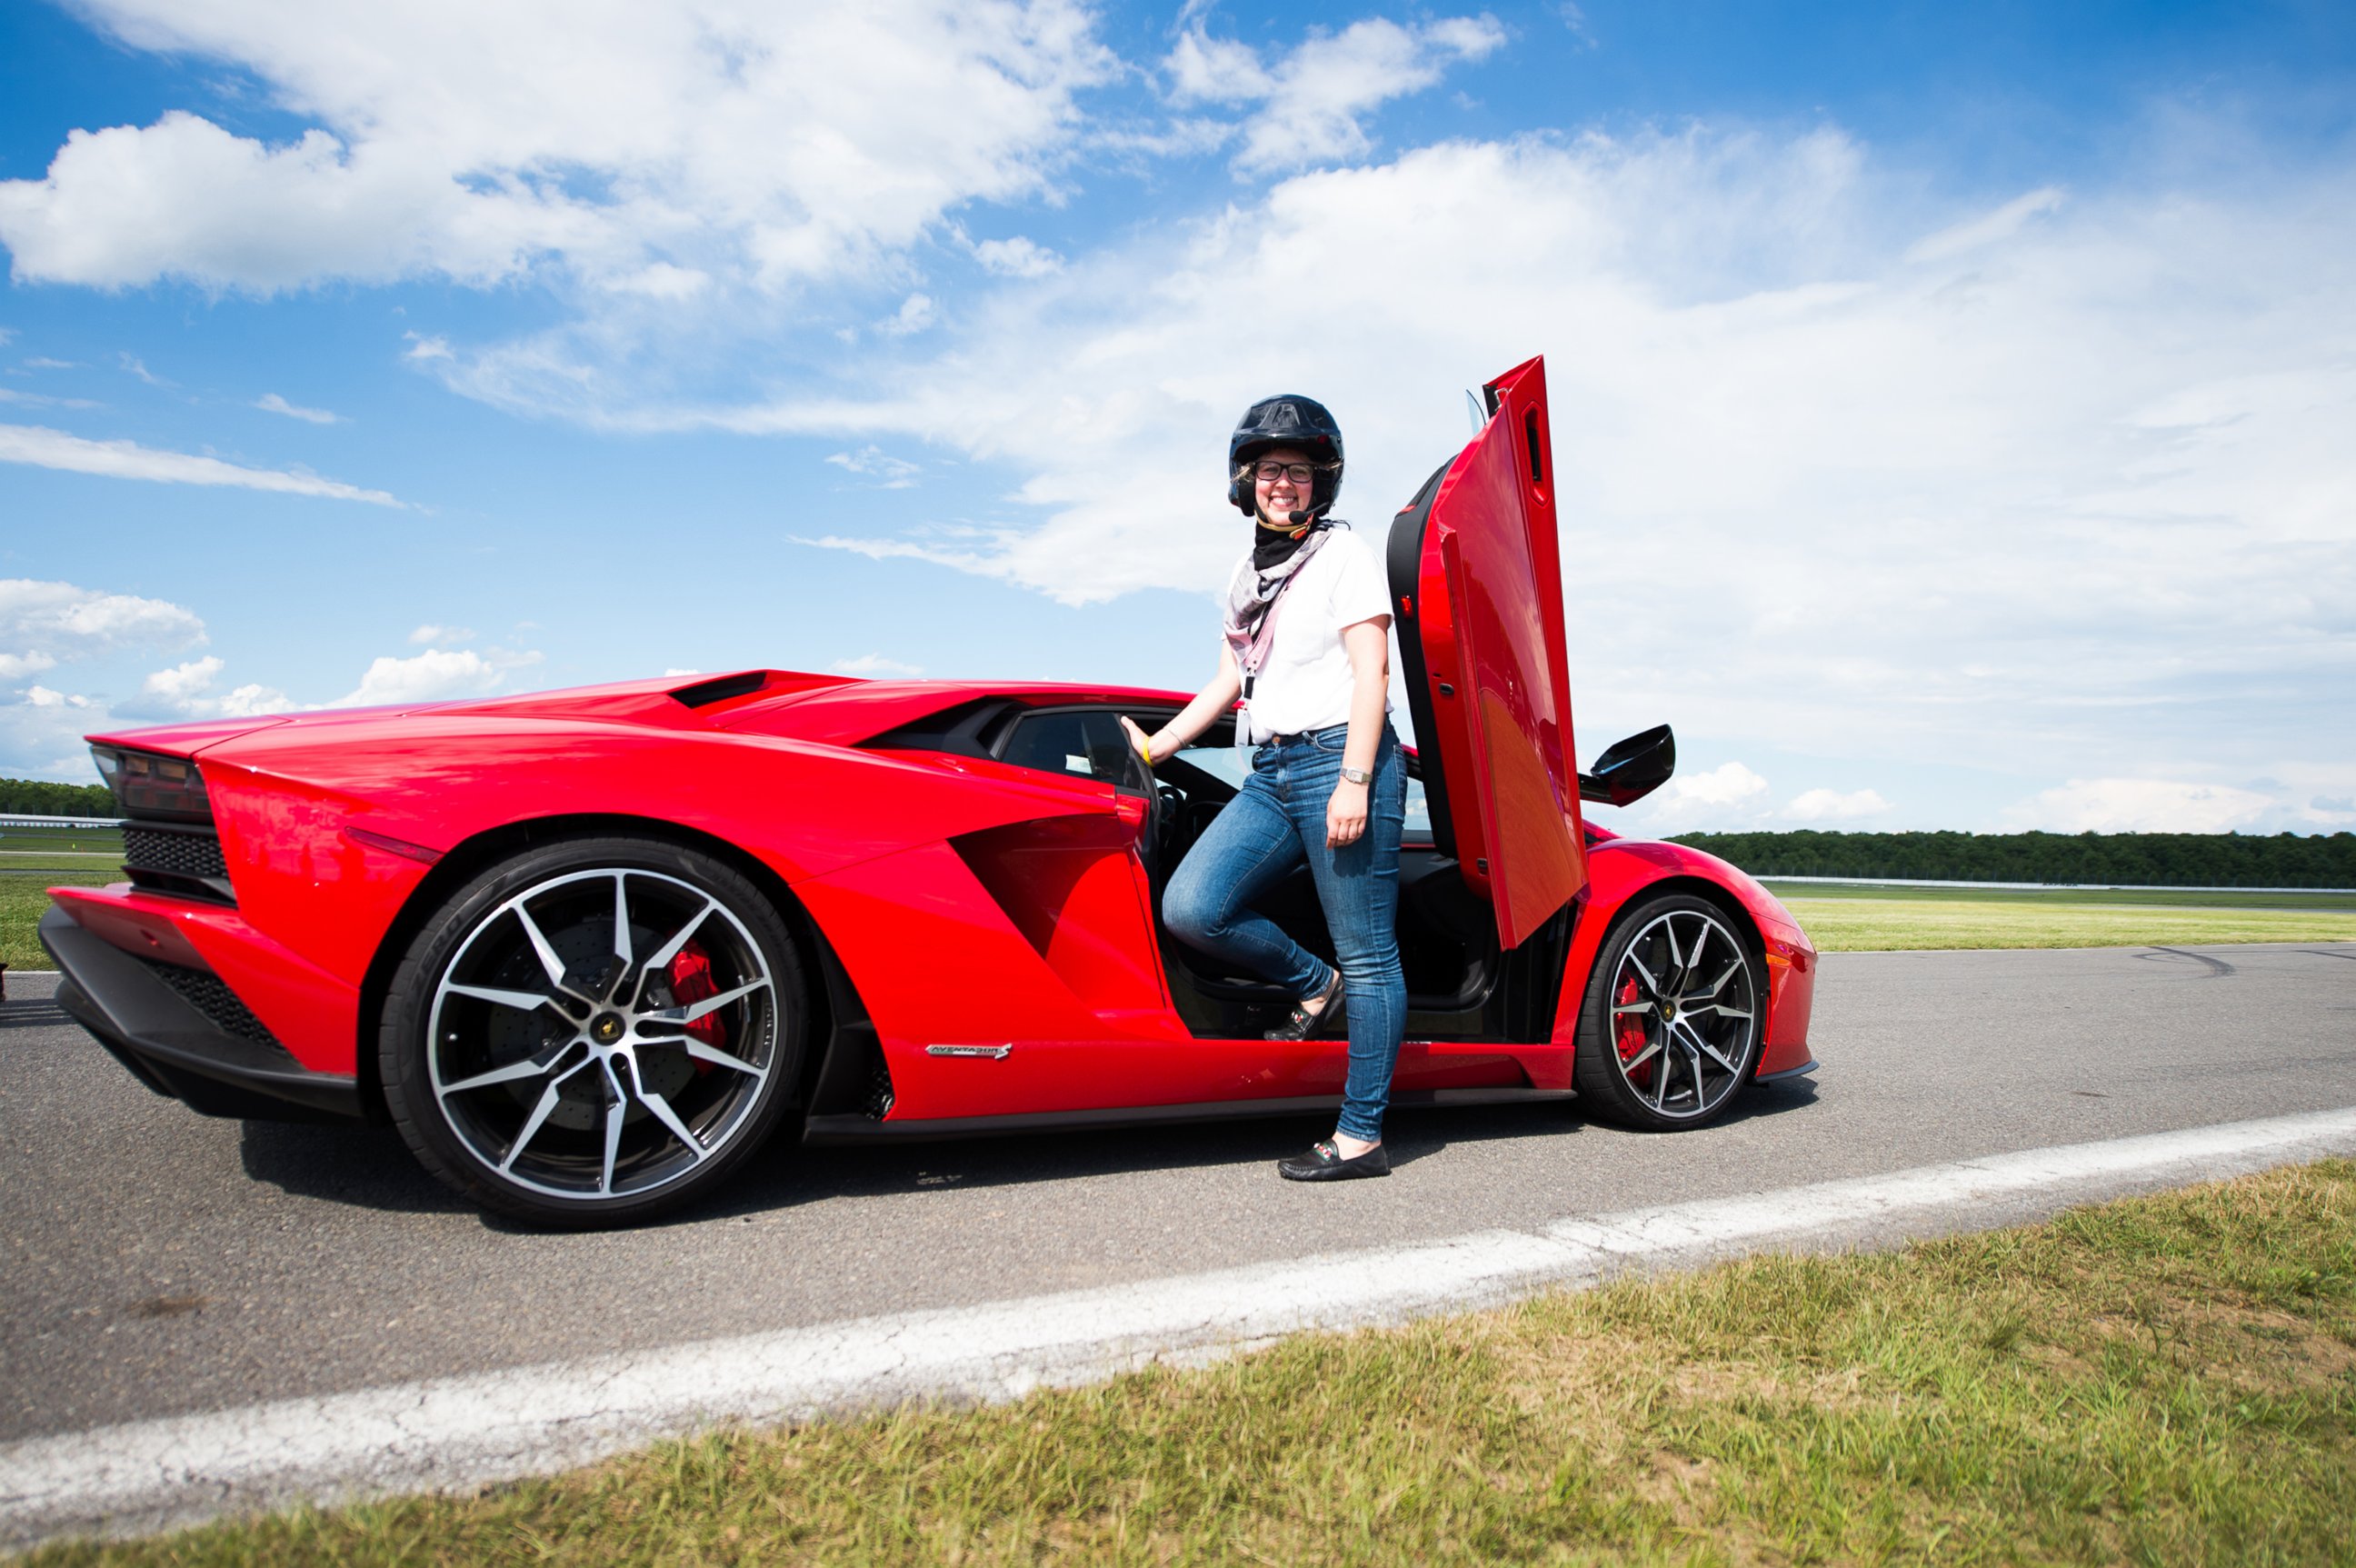 PHOTO: Journalists had a chance to test-drive the Aventador S at the Pocono Raceway.